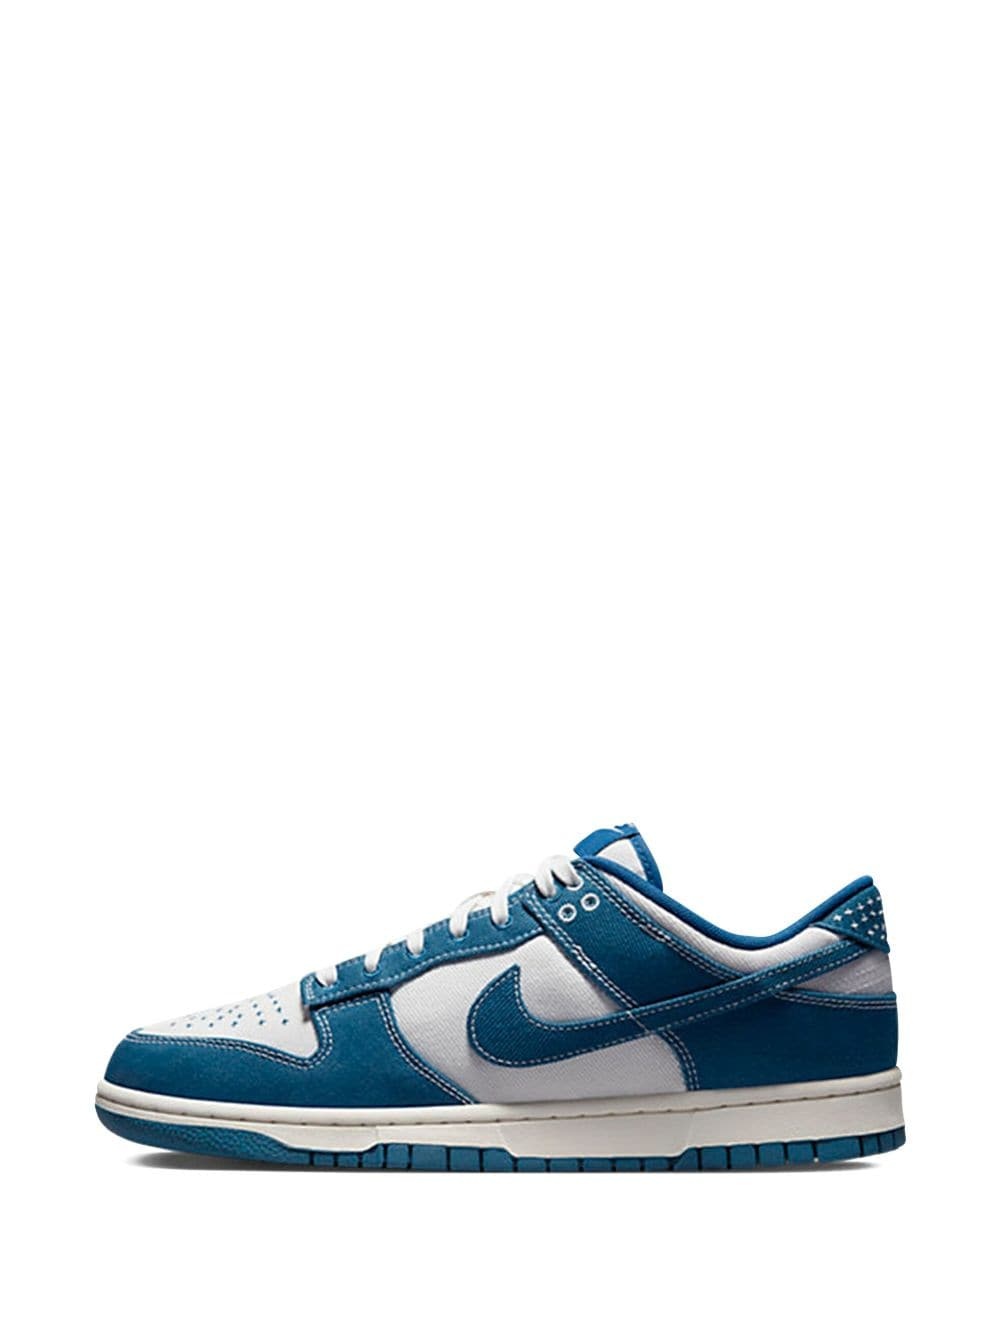 Dunk Low Shashiko "Industrial Blue" sneakers - 5